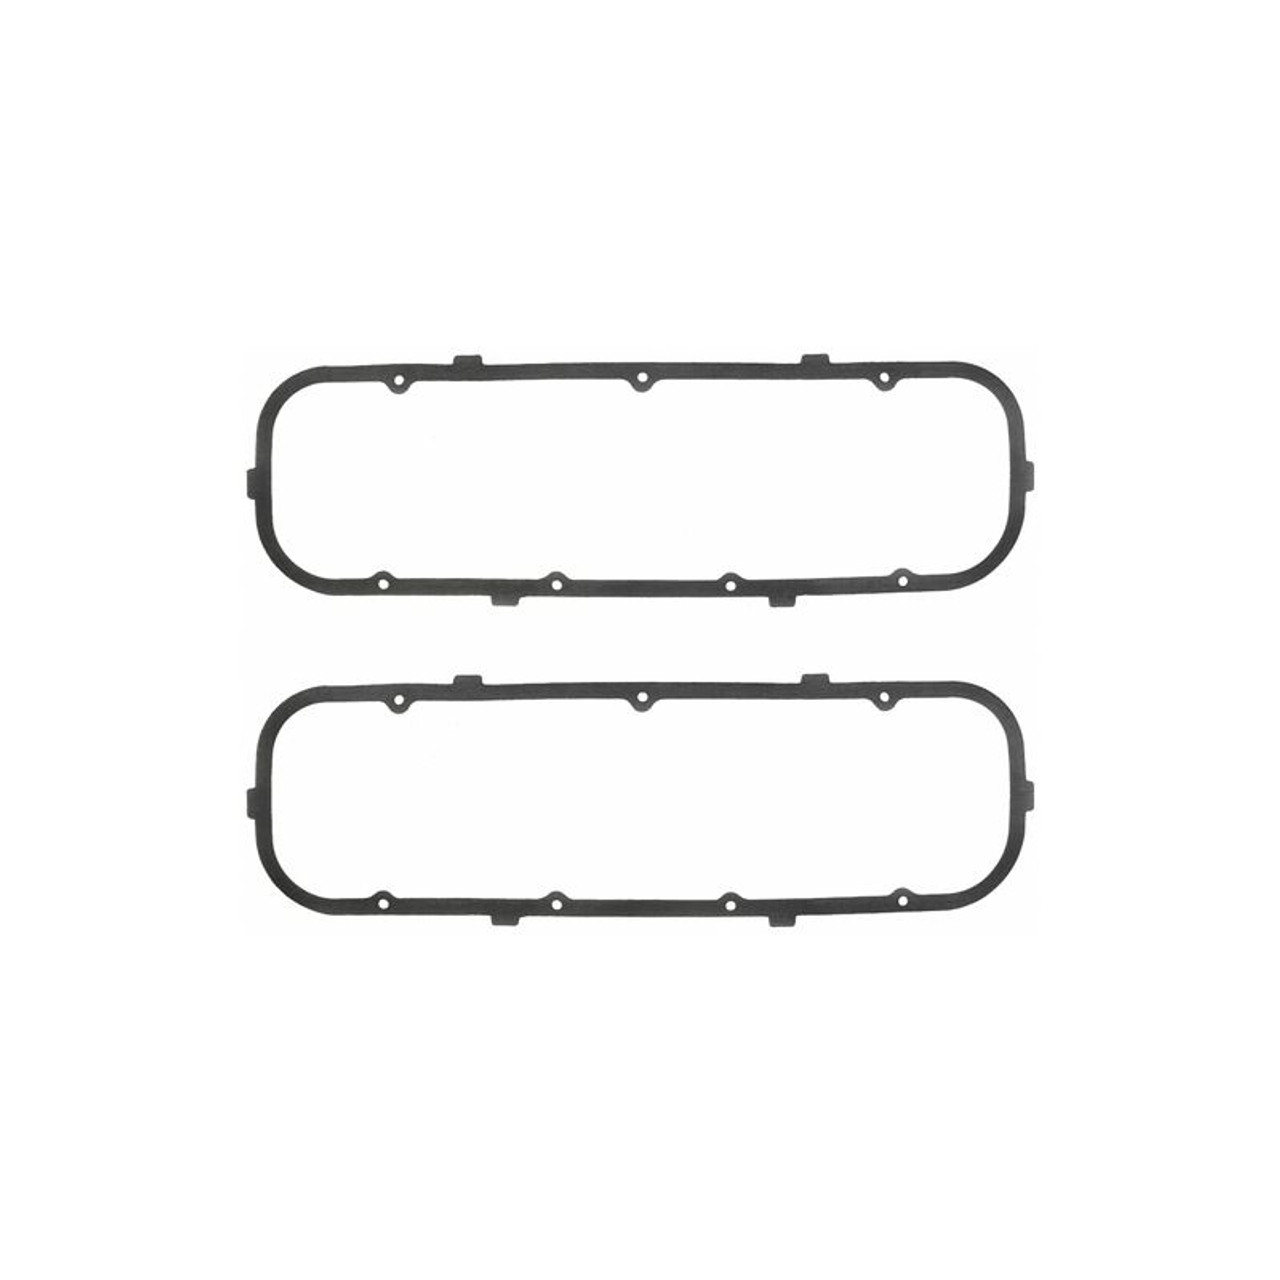 Fel-Pro 1605 Big Block Chevy, Fel-CoPrene Valve Cover Gaskets, .156 Thick,  Rubber, Pair